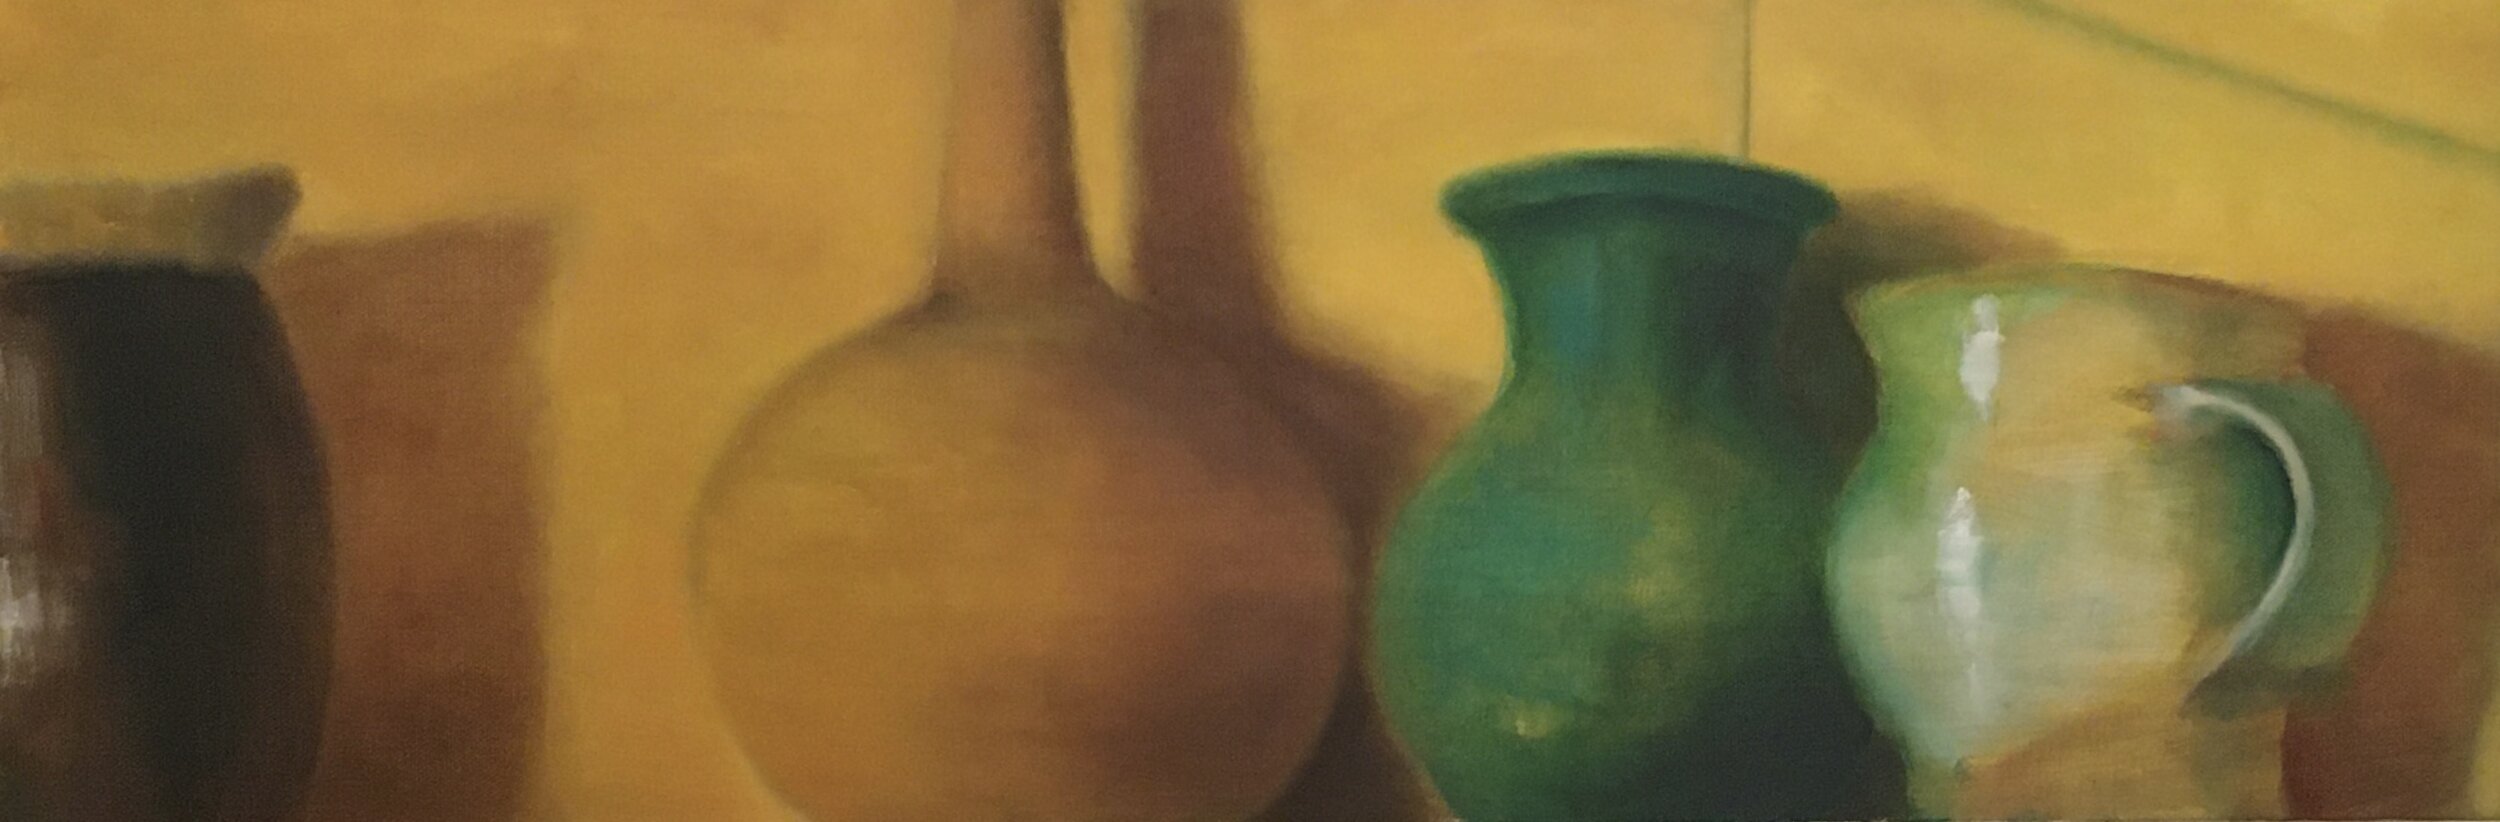 "Pregnant Pottery" | Oil on Canvas | 10x30